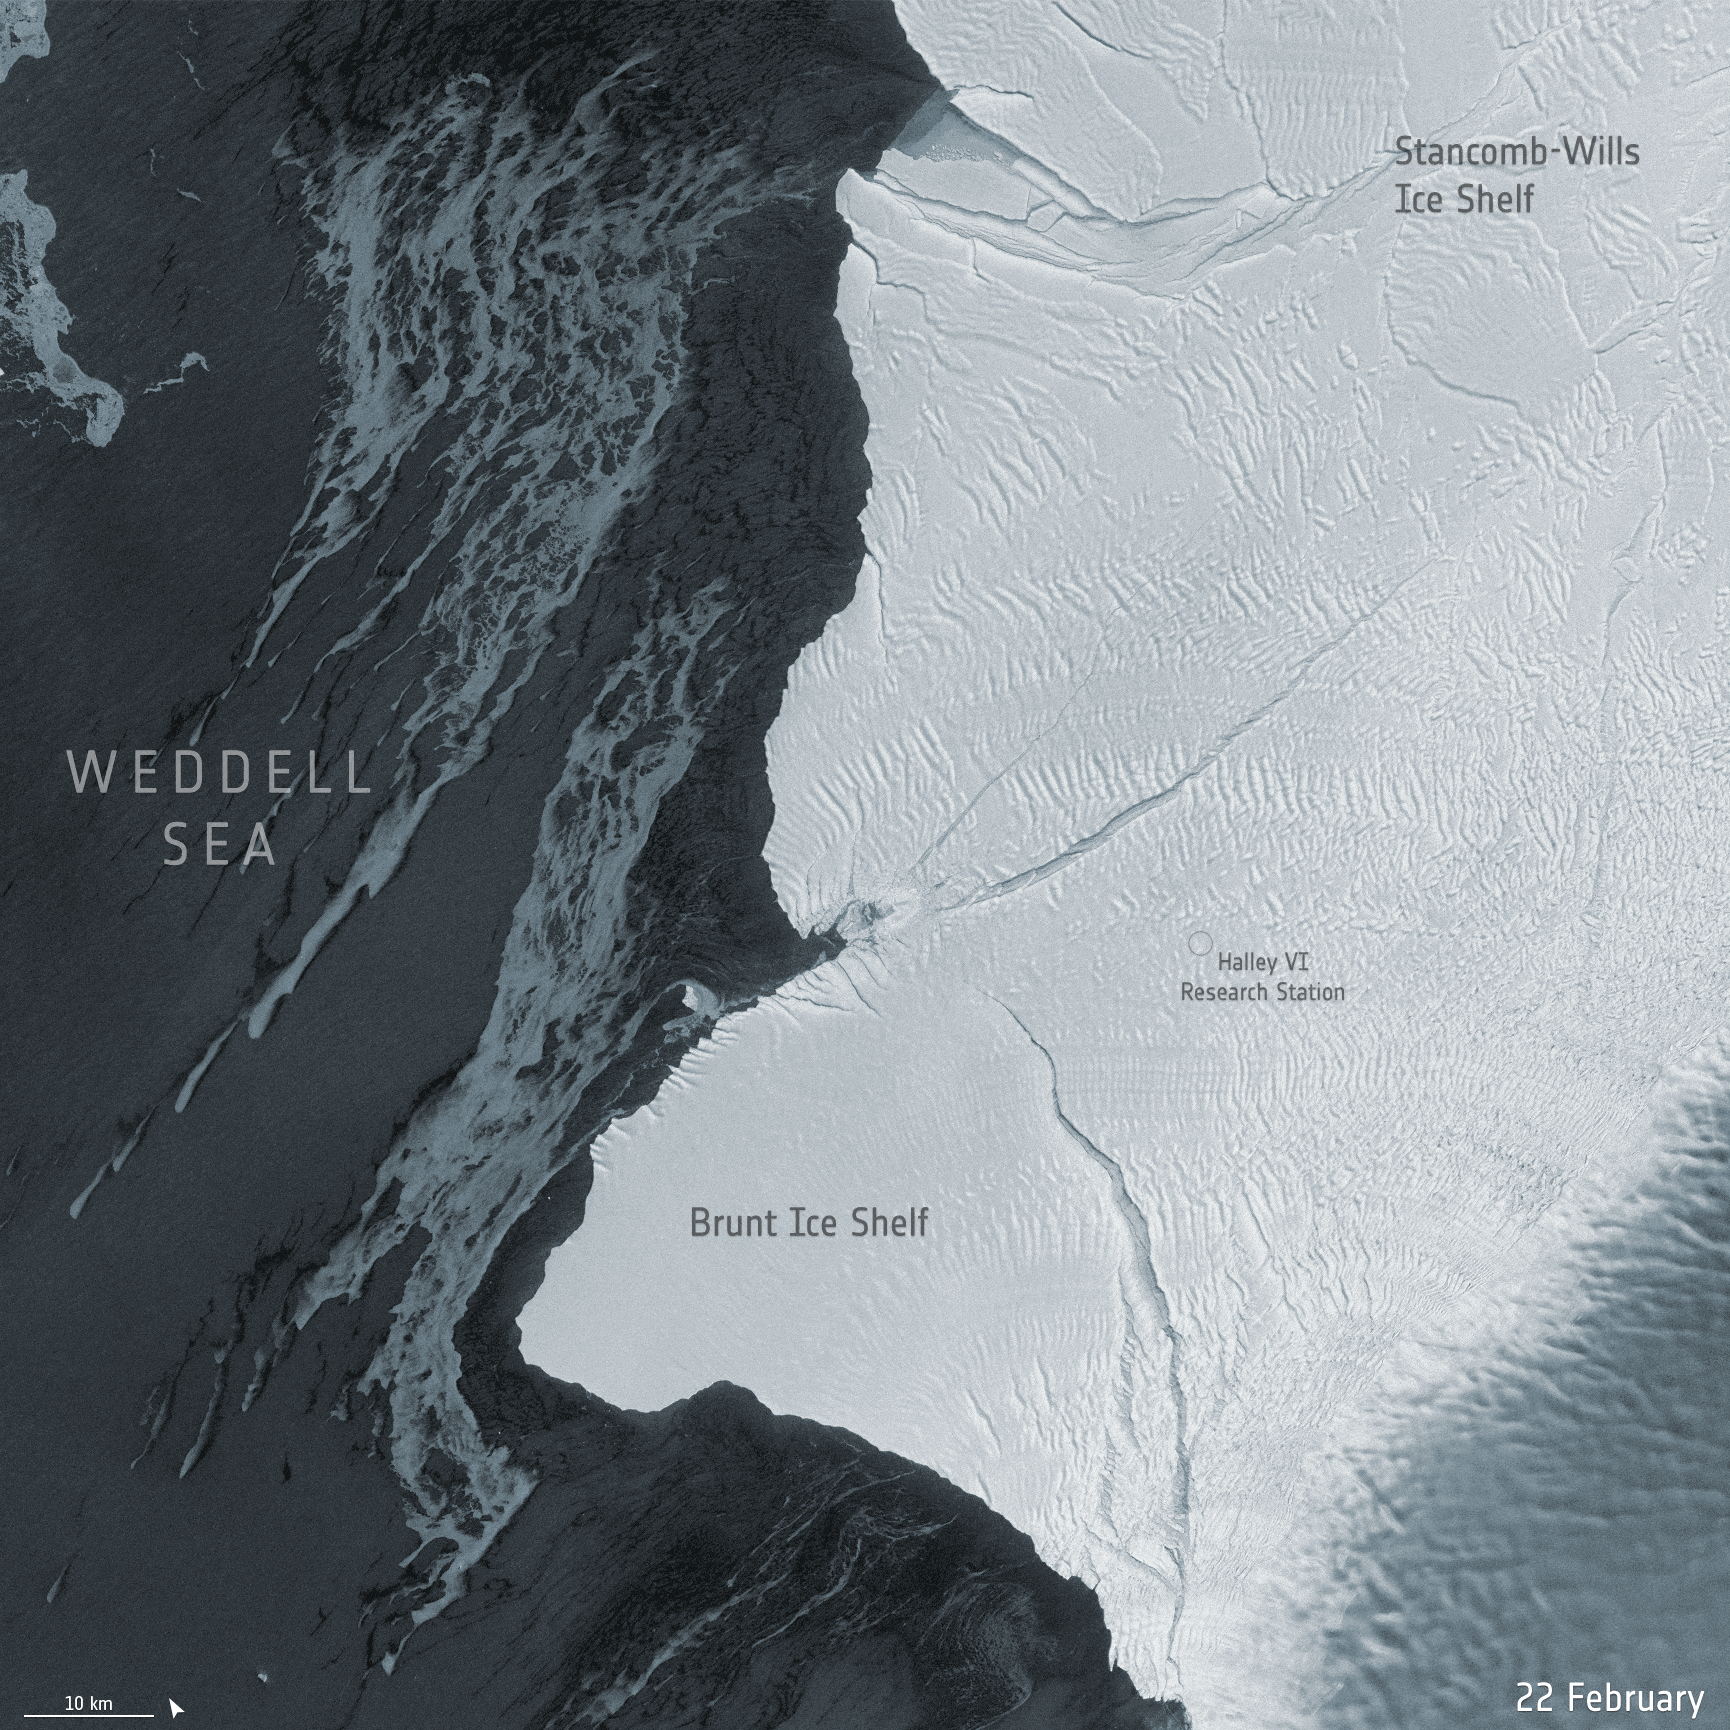 New Copernicus Sentinel-1 radar images show a giant iceberg breaking off from the northern section of Antarctica’s Brunt Ice Shelf